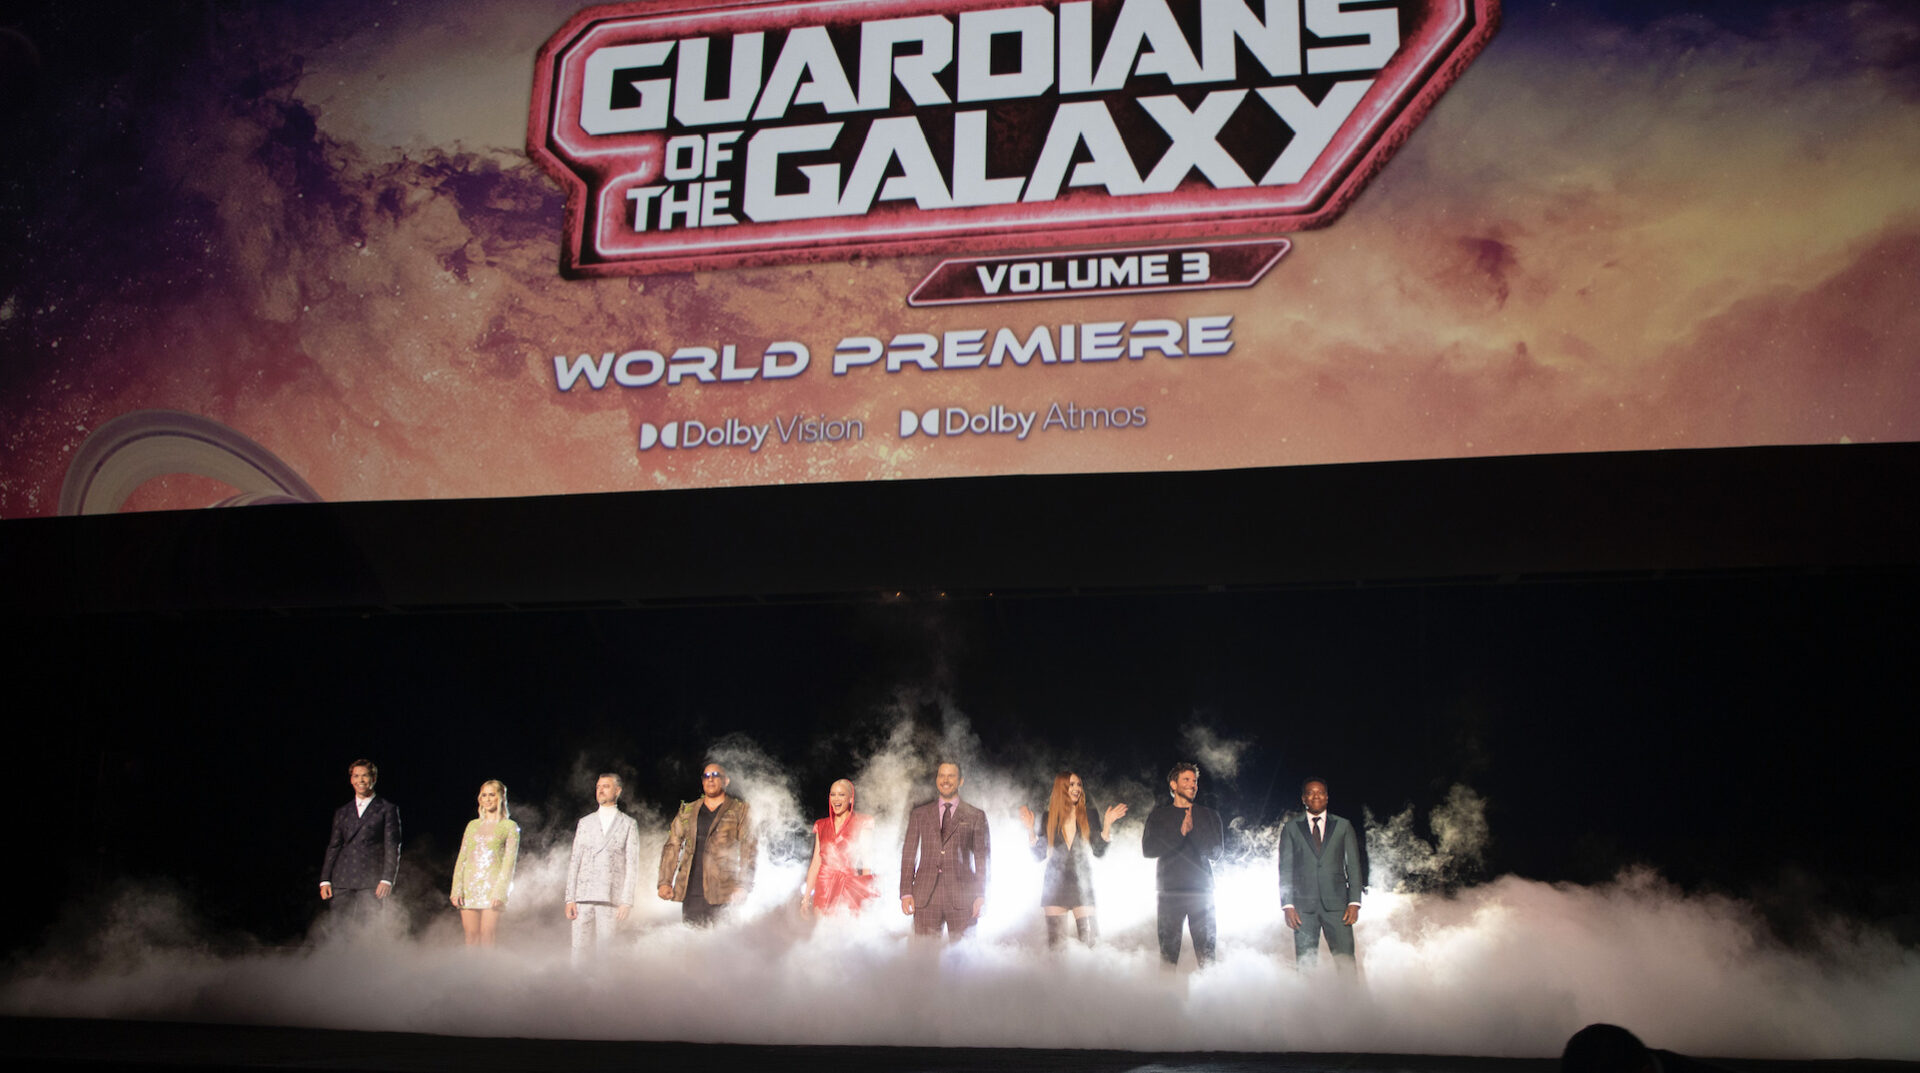 Marvel Studios Guardians Of The Galaxy Vol. 3 World Premiere In Hollywood